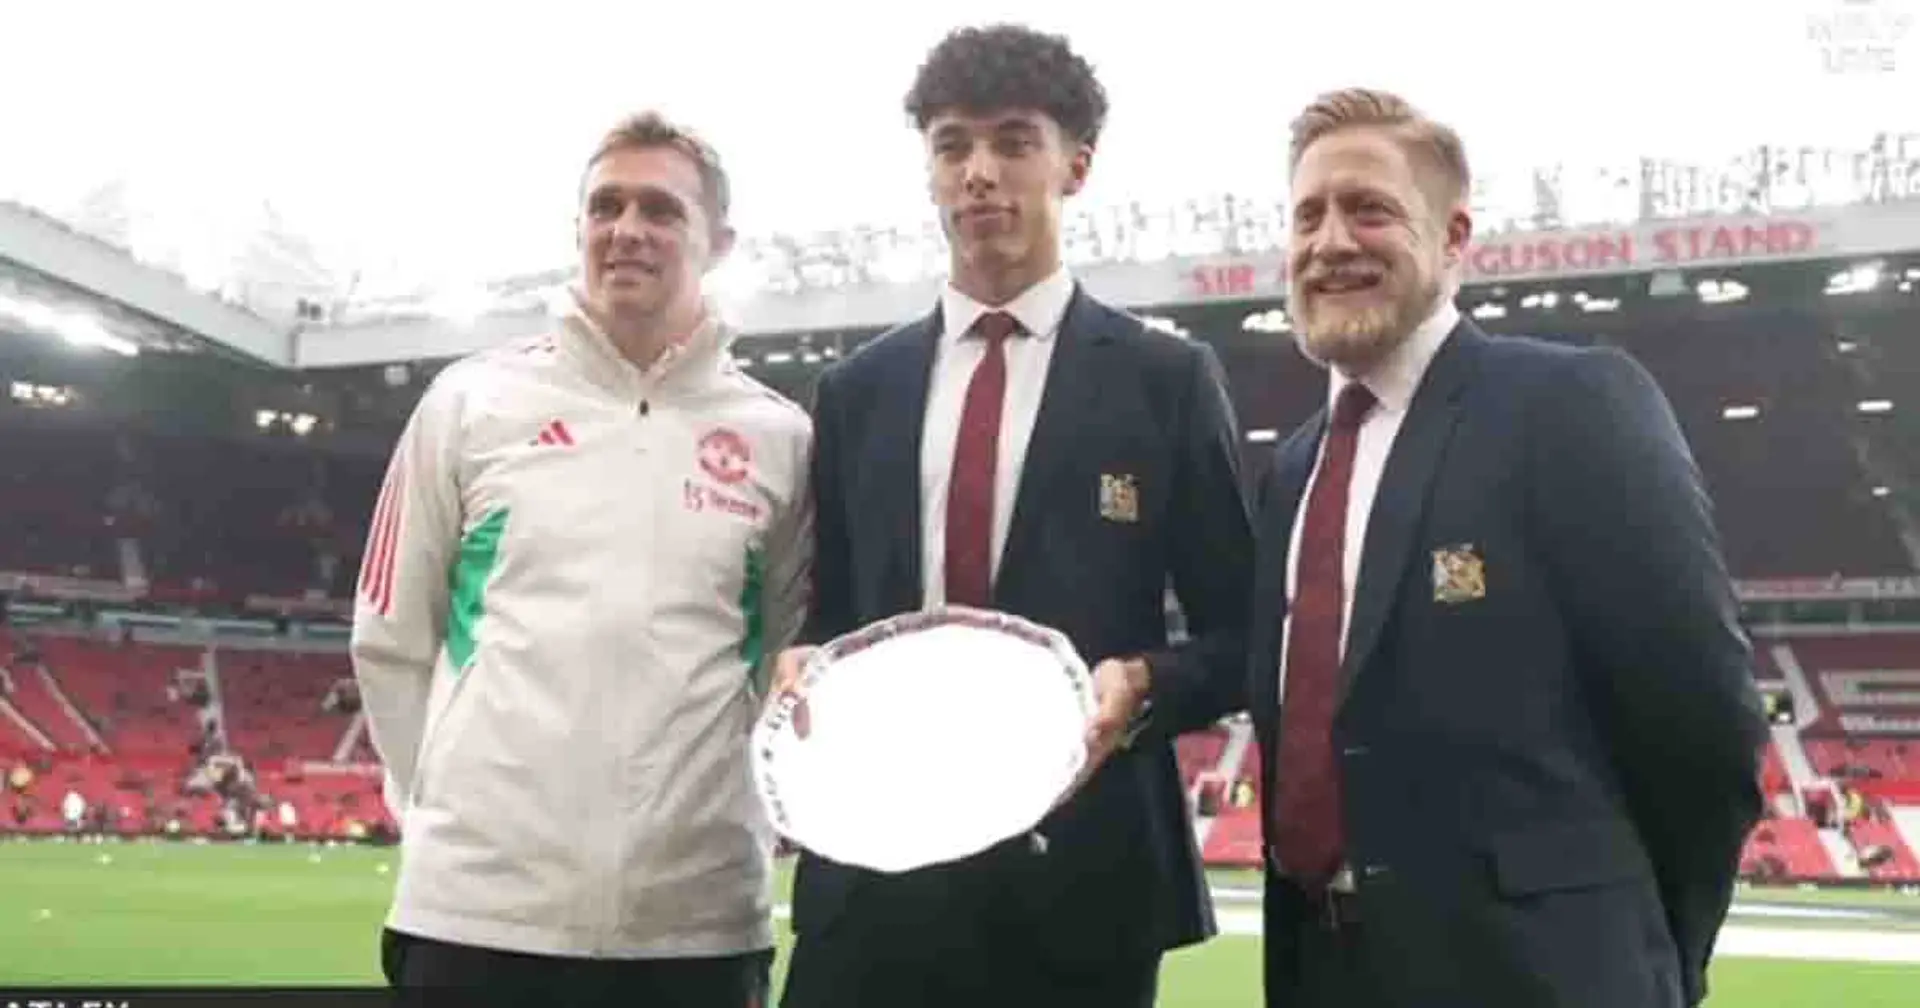 Ethan Wheatley wins 23/24 Man United Young Player of the Season award, why next season could be special